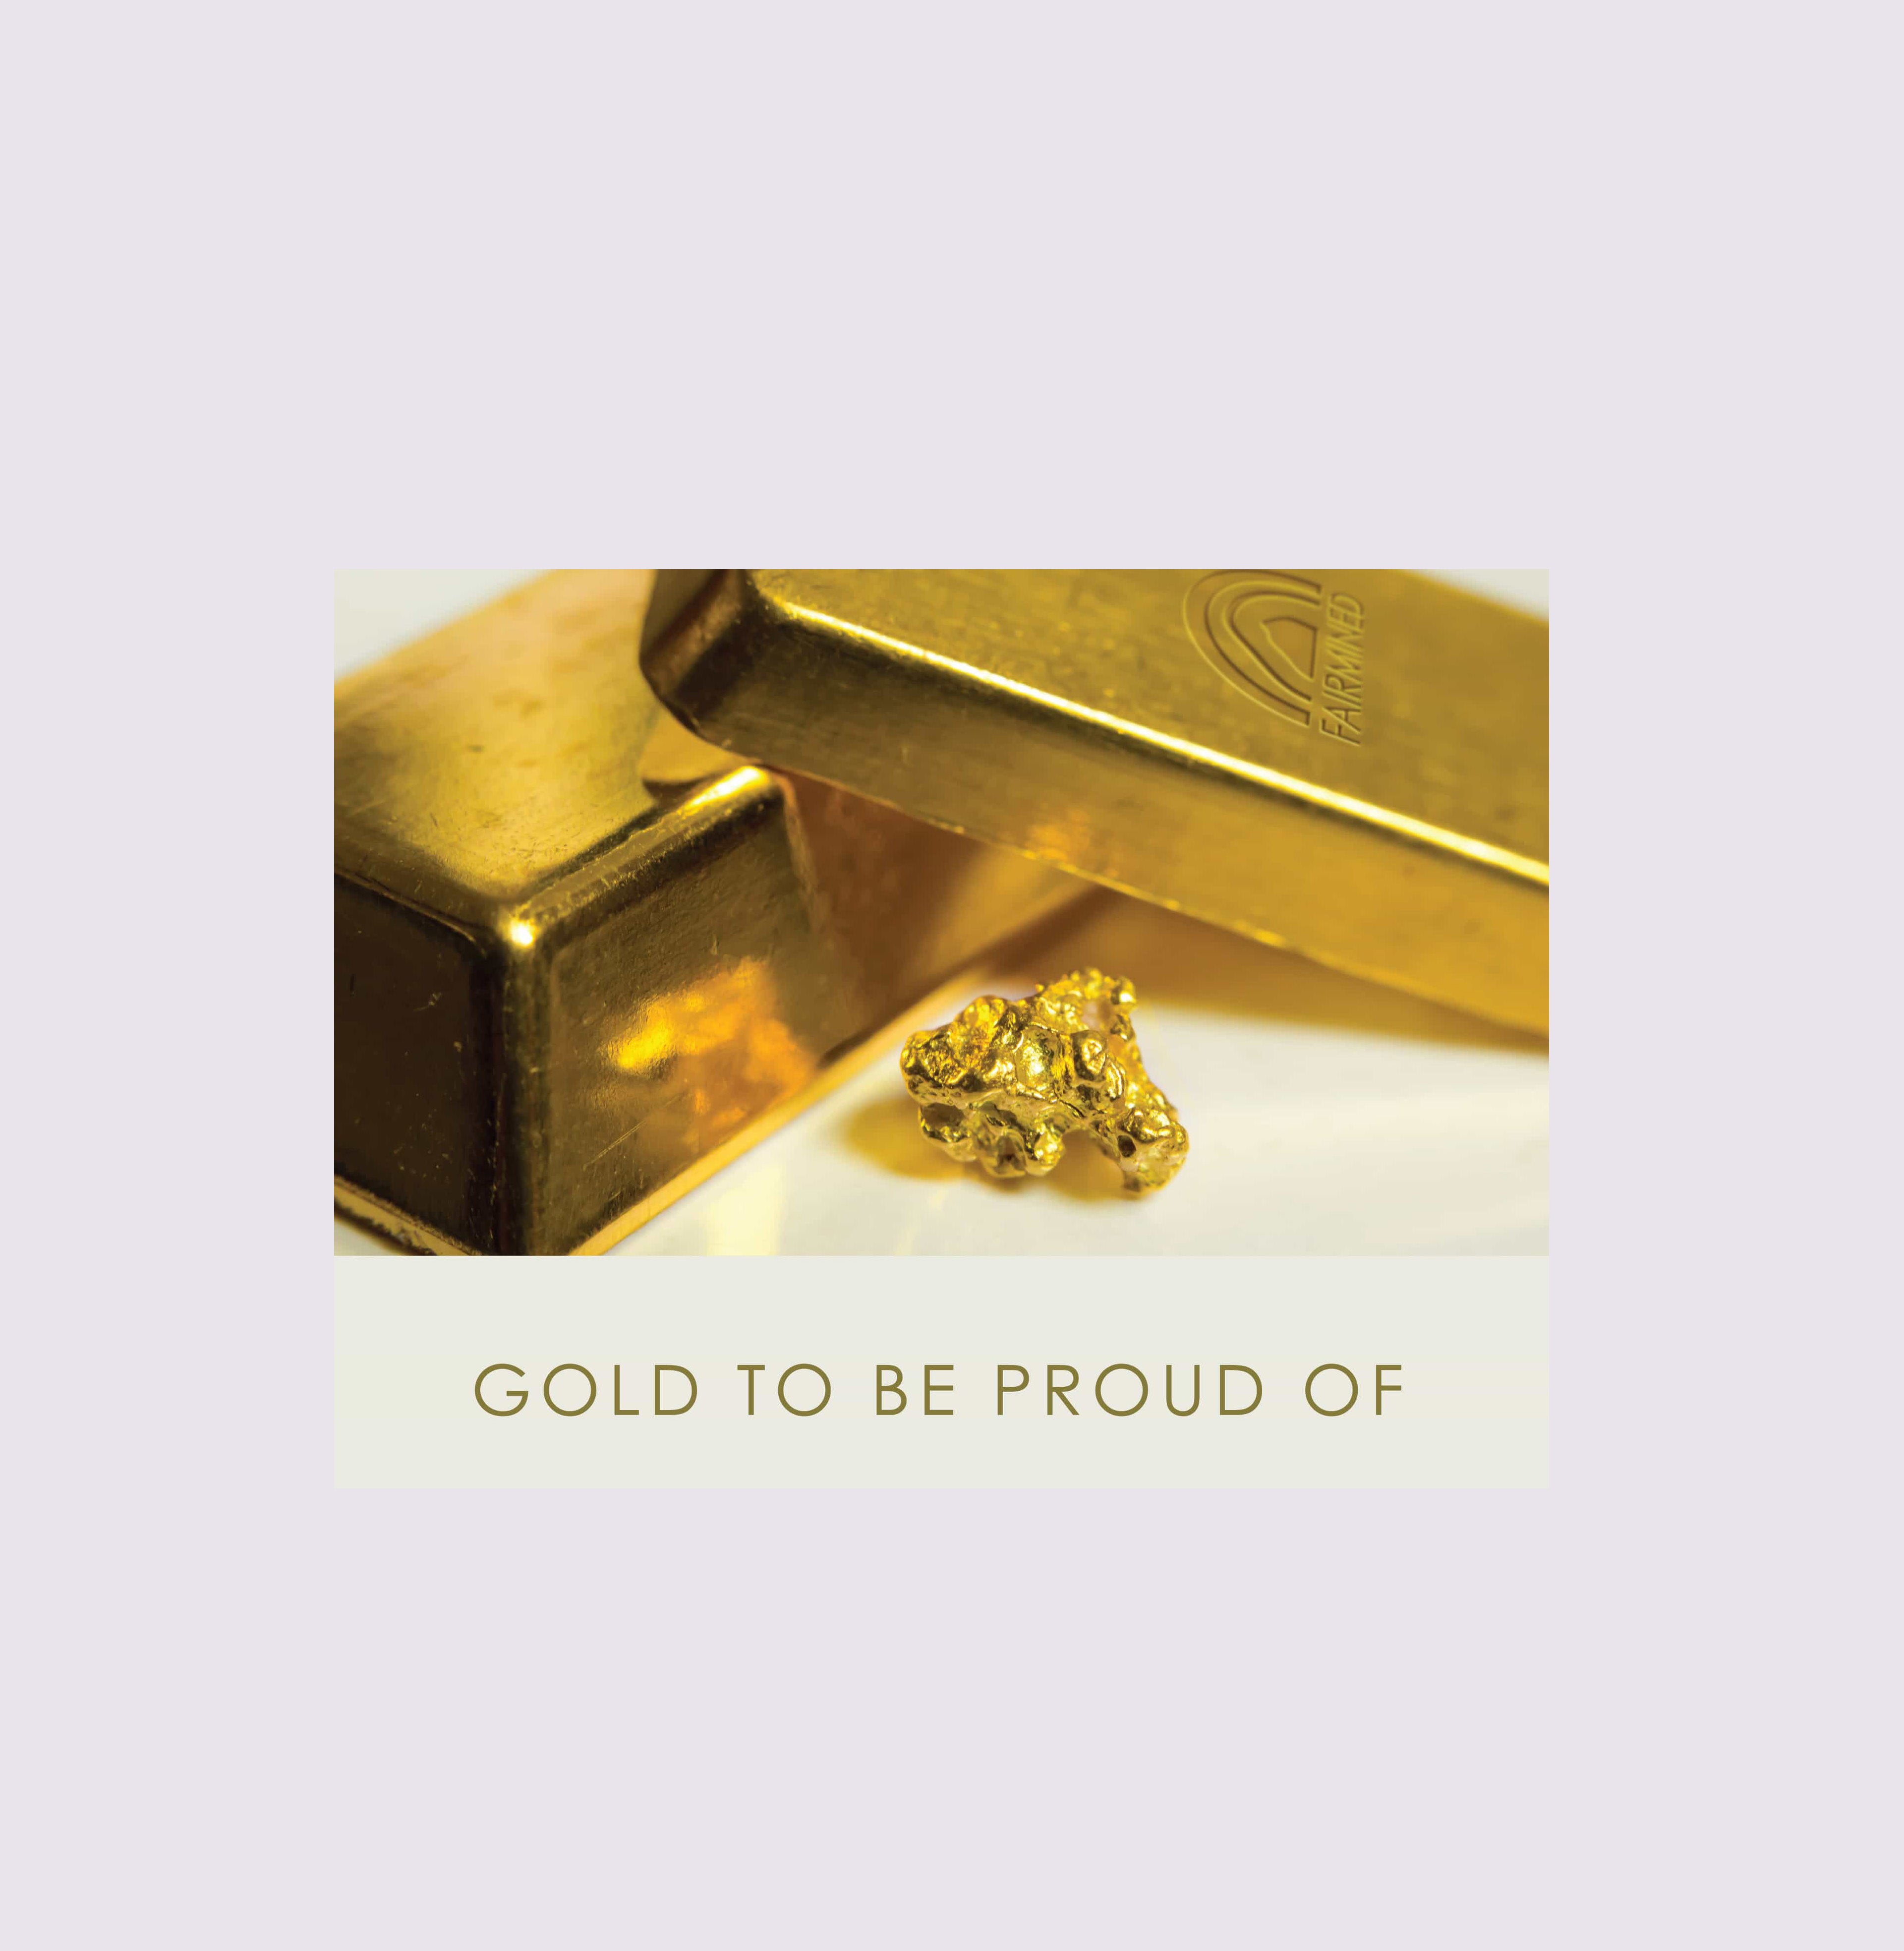 Our Gold